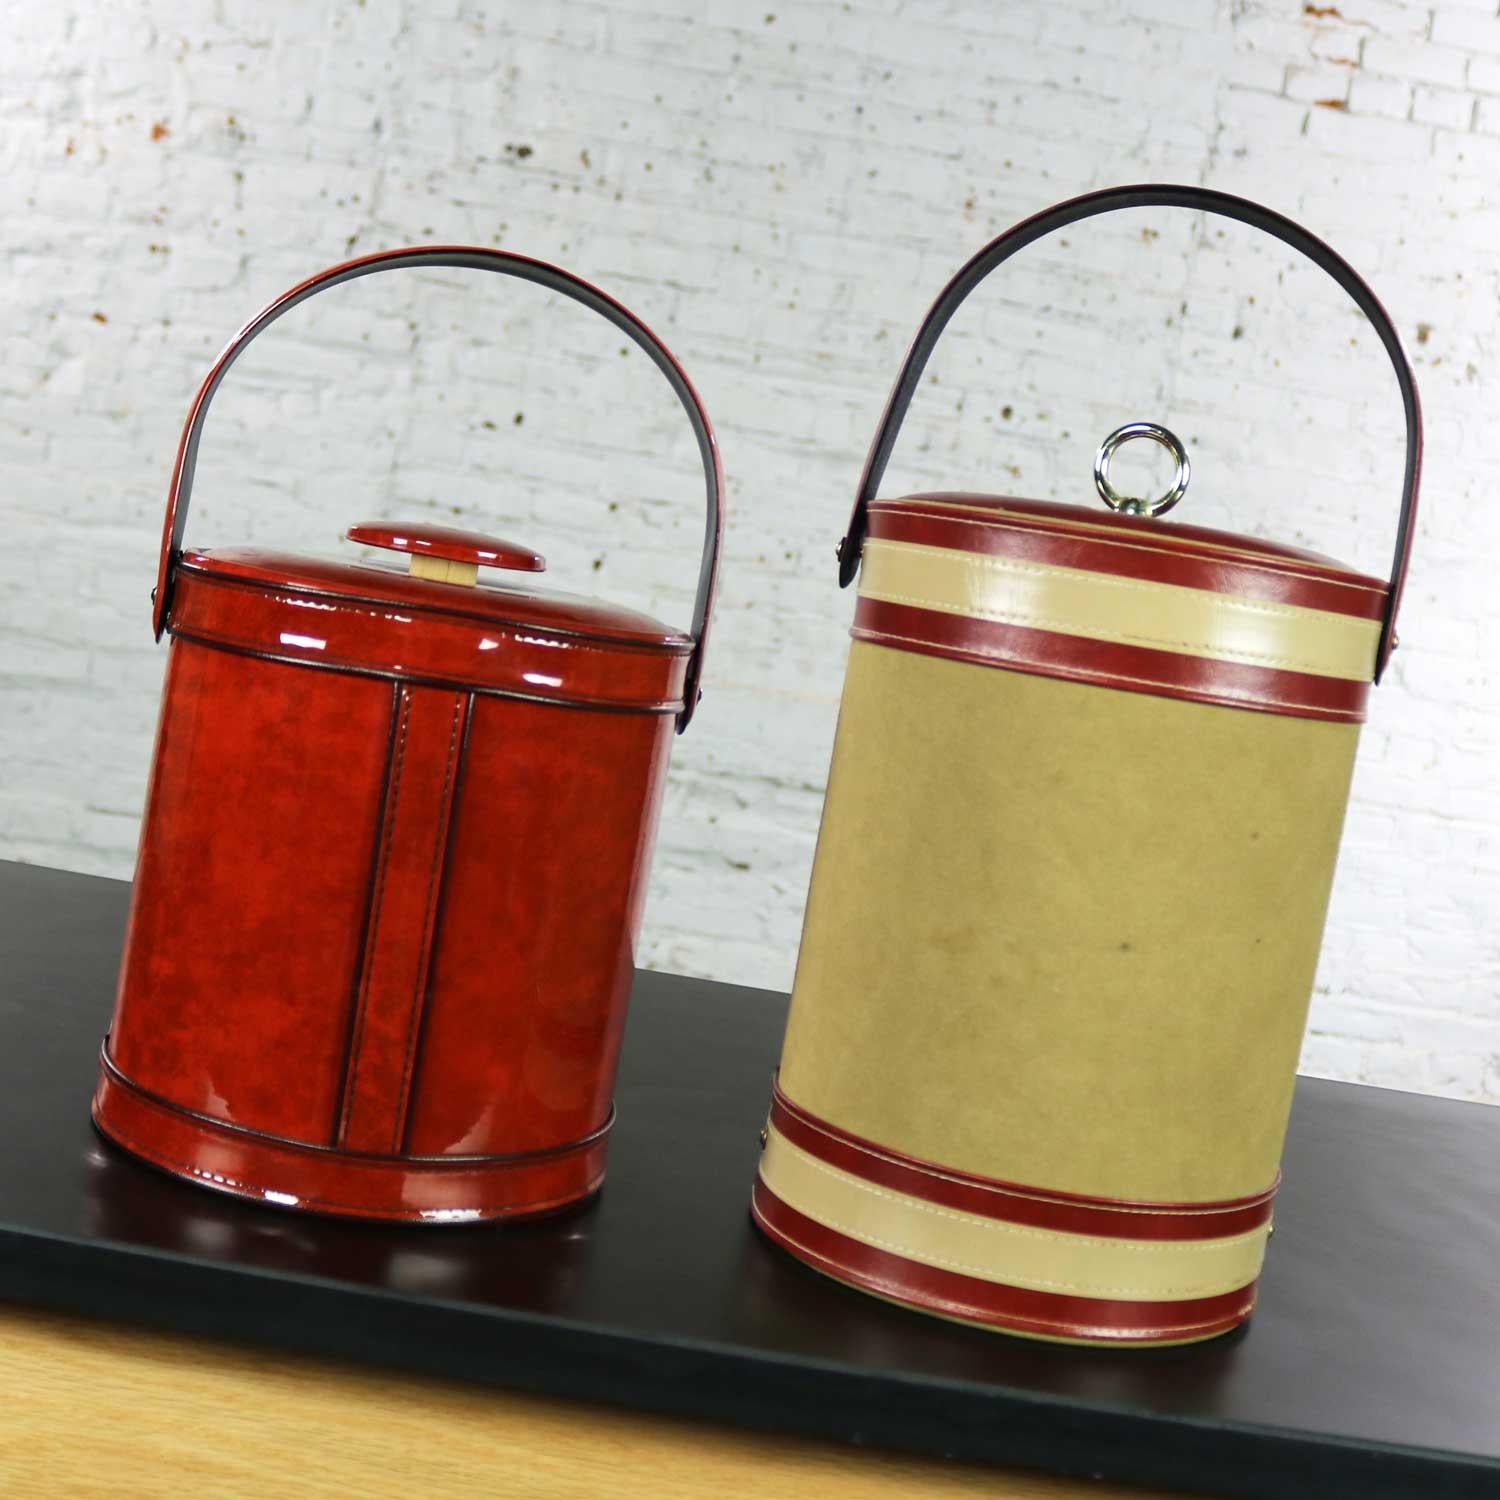 Handsome George Briard ice buckets. One is taller and one is the height we are used to seeing. Both are signed on their bottoms. Both have a similar burnt orange coloration. Both are in wonderful vintage condition. Clean inside and out. Please see